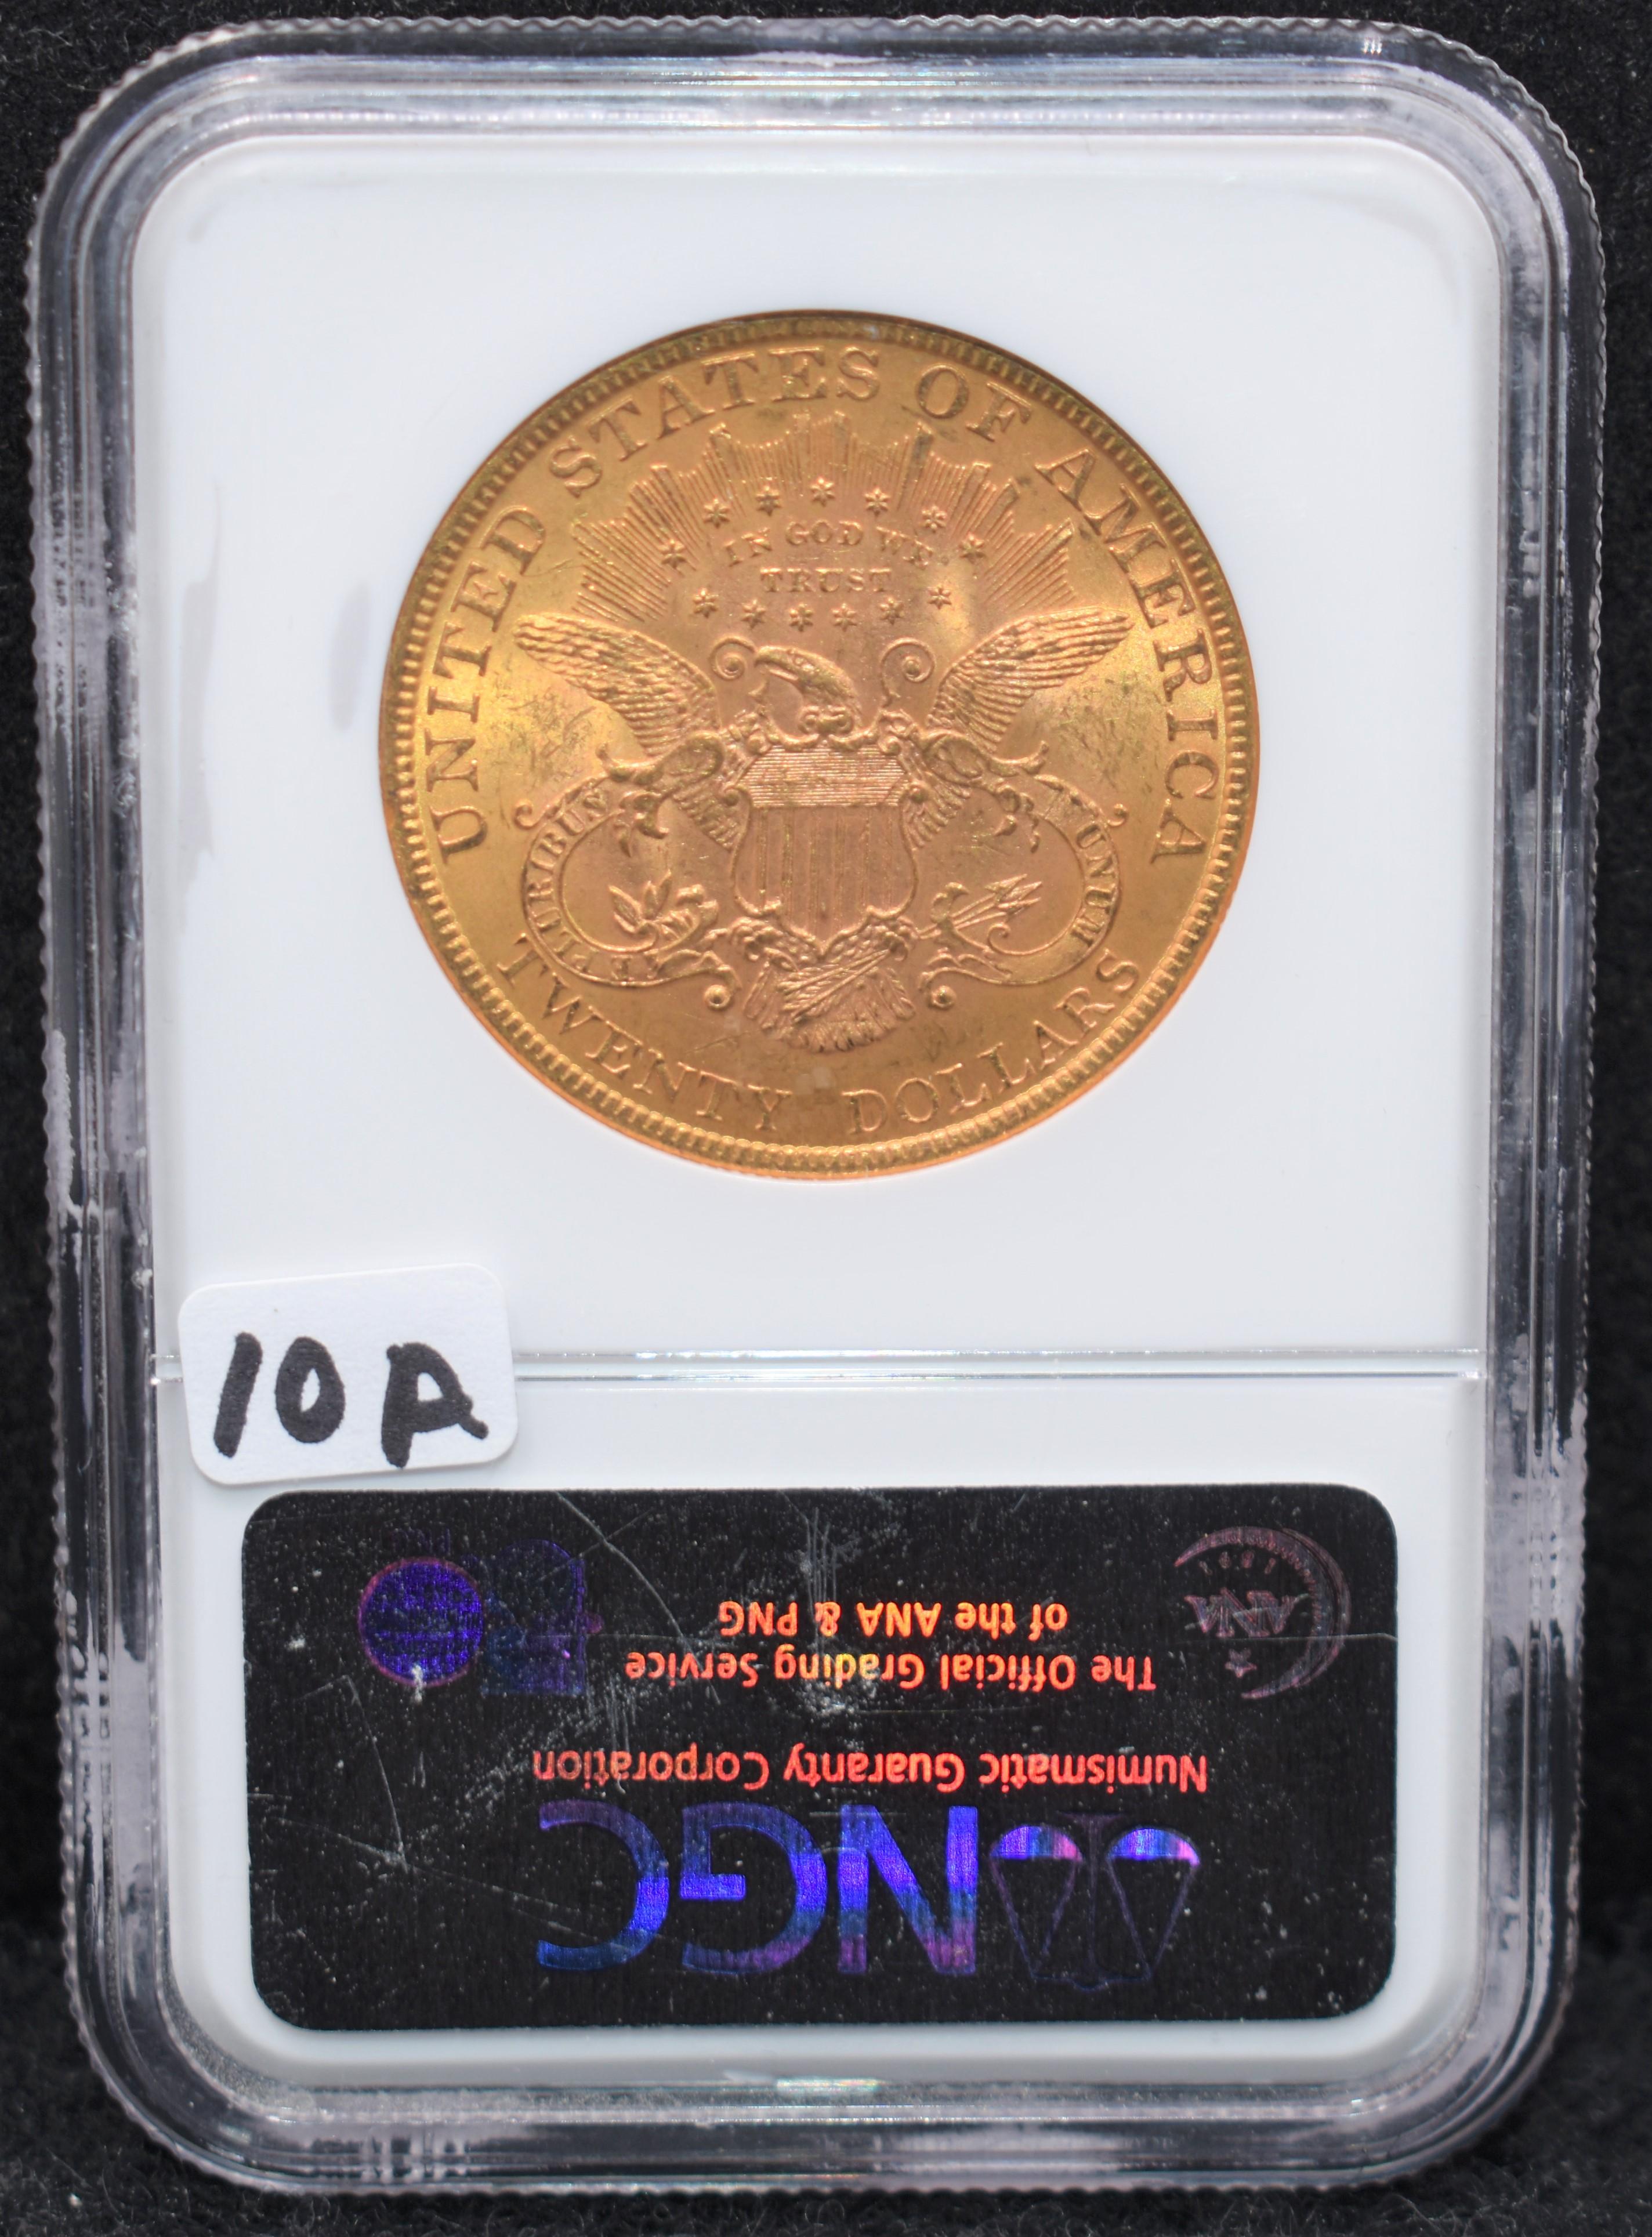 1895 $20 LIBERTY GOLD COIN - NGC MS63 FROM SAFES